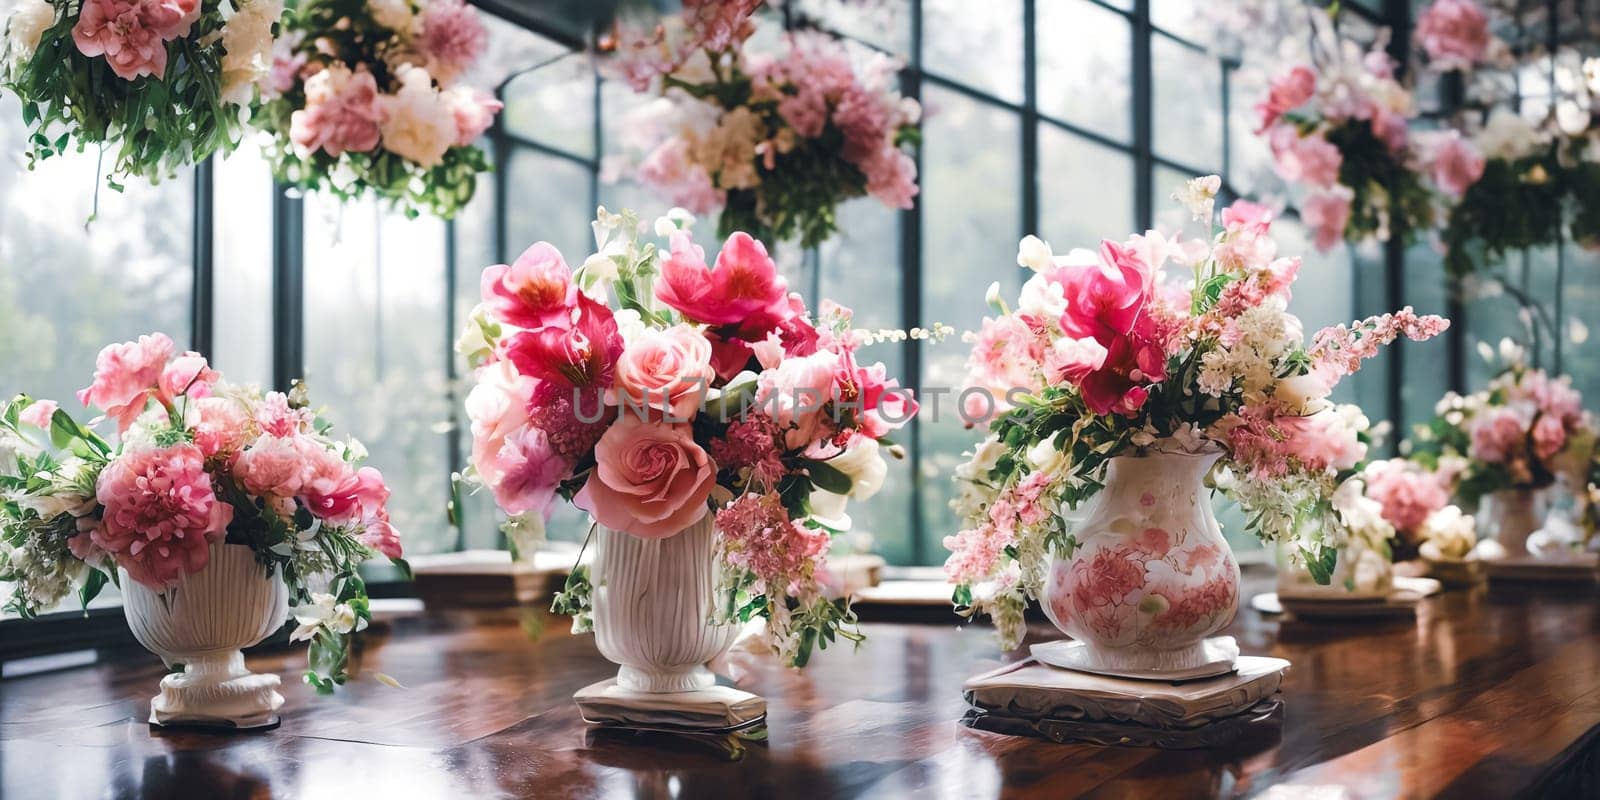 Delicate elegance of blooming flowers, intricate petals, and vibrant floral arrangements